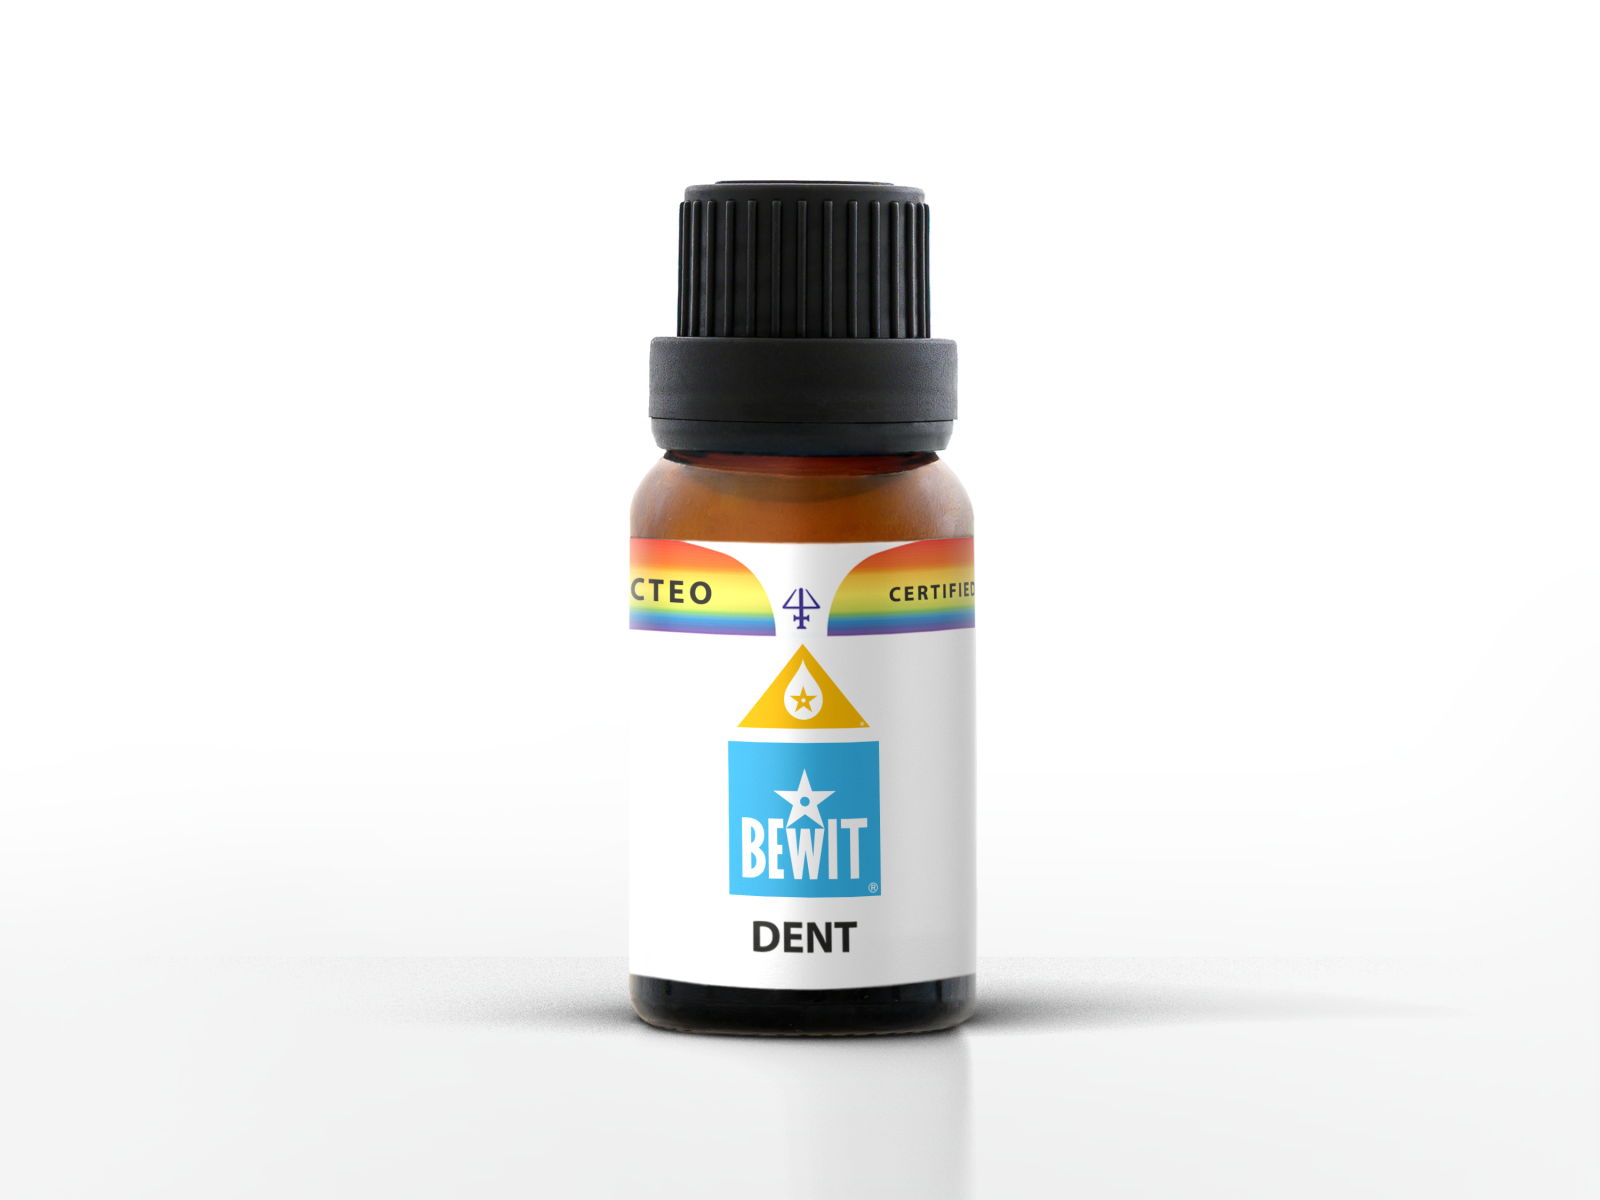 BEWIT DENT - 100% natural essential oil blend in CTEO® quality - 1